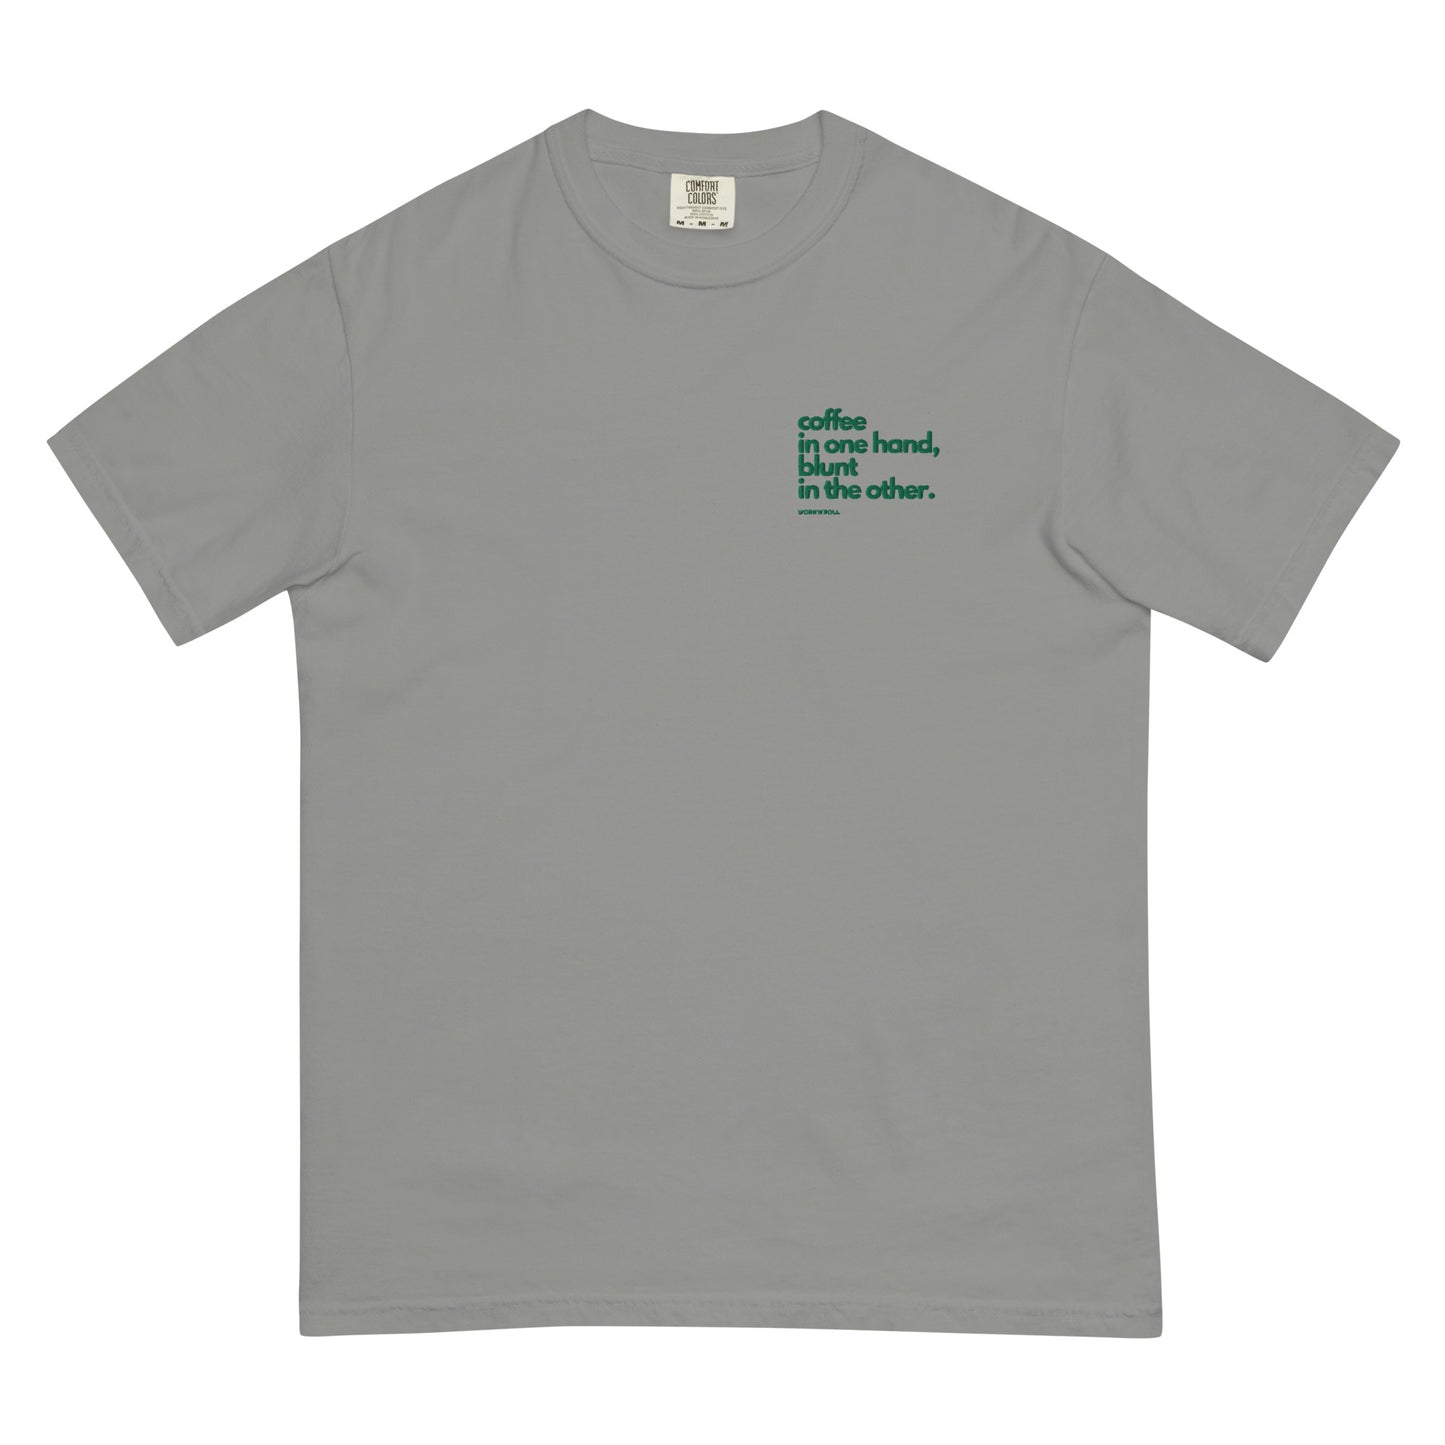 Garment-dyed heavyweight t-shirt "Coffee in one hand, blunt in the other"